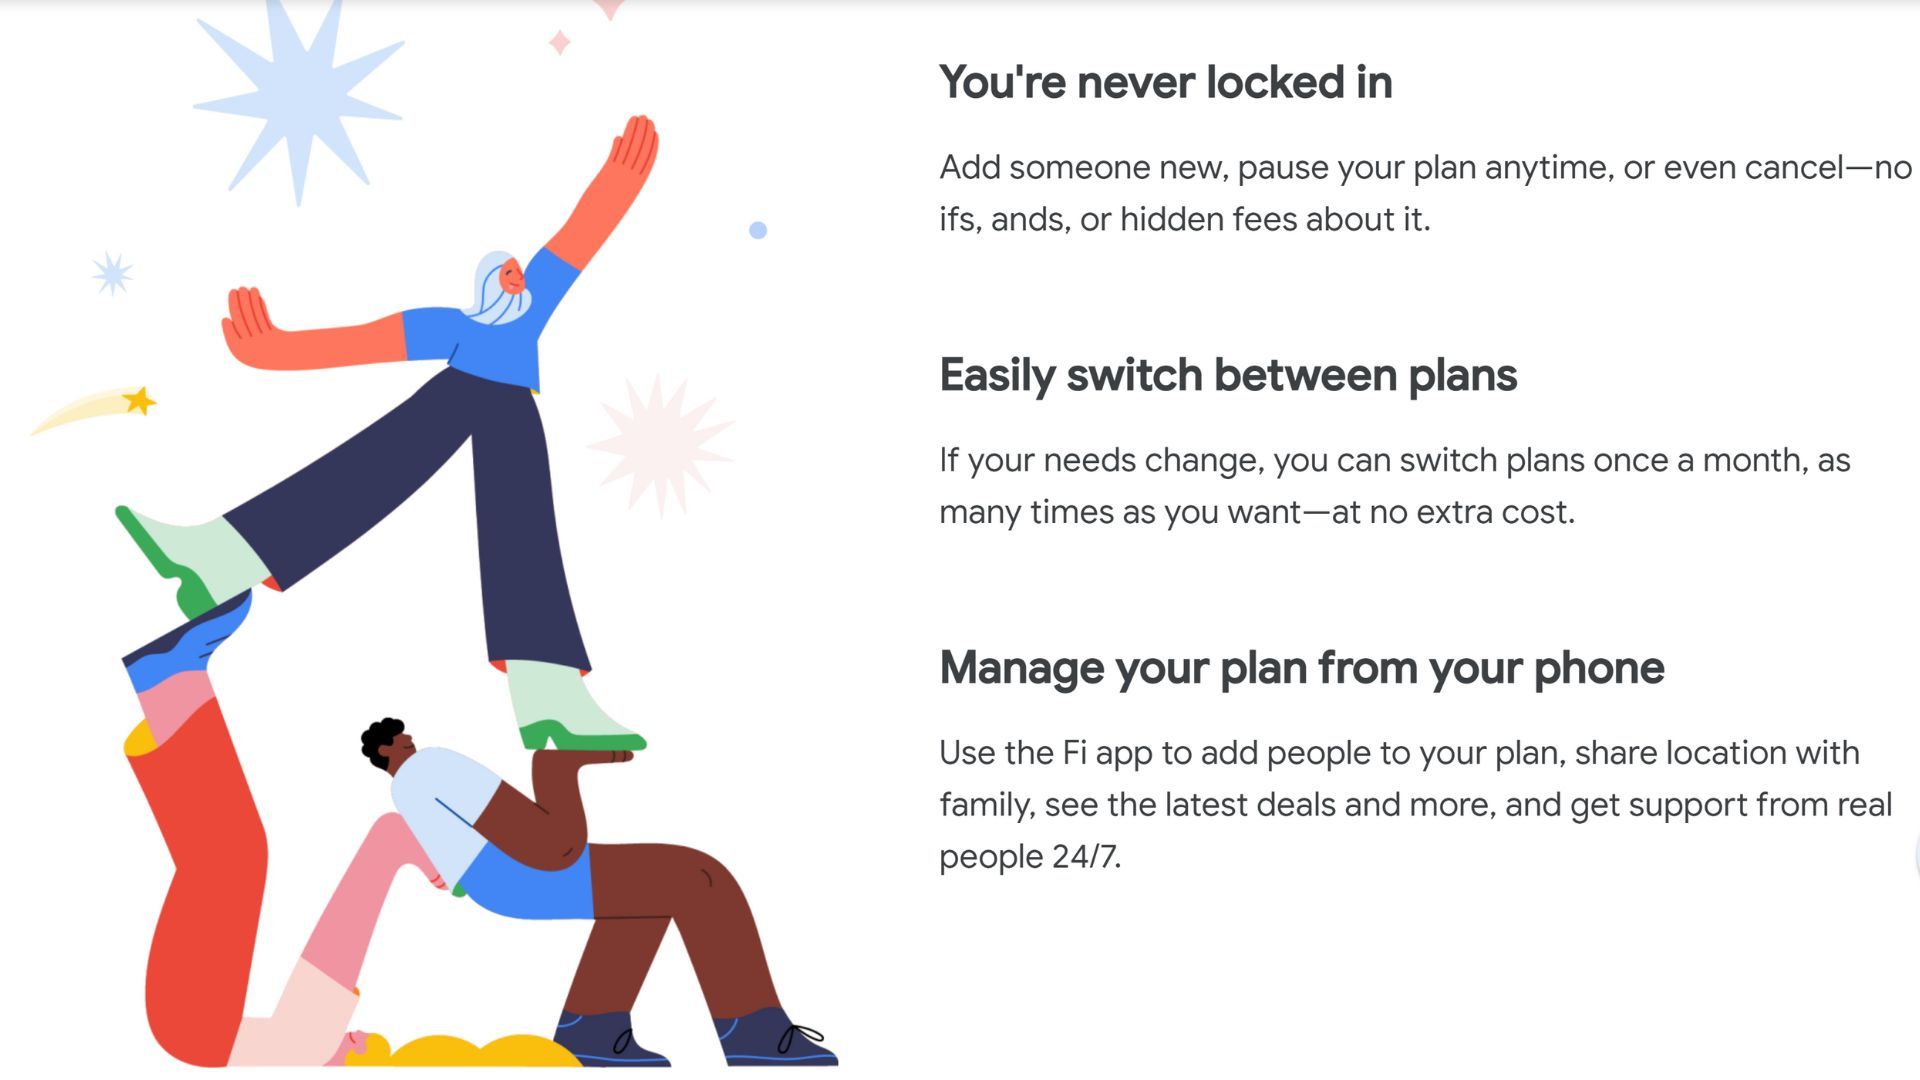 screenshot from google fi website describing how you can switch between plans once a month